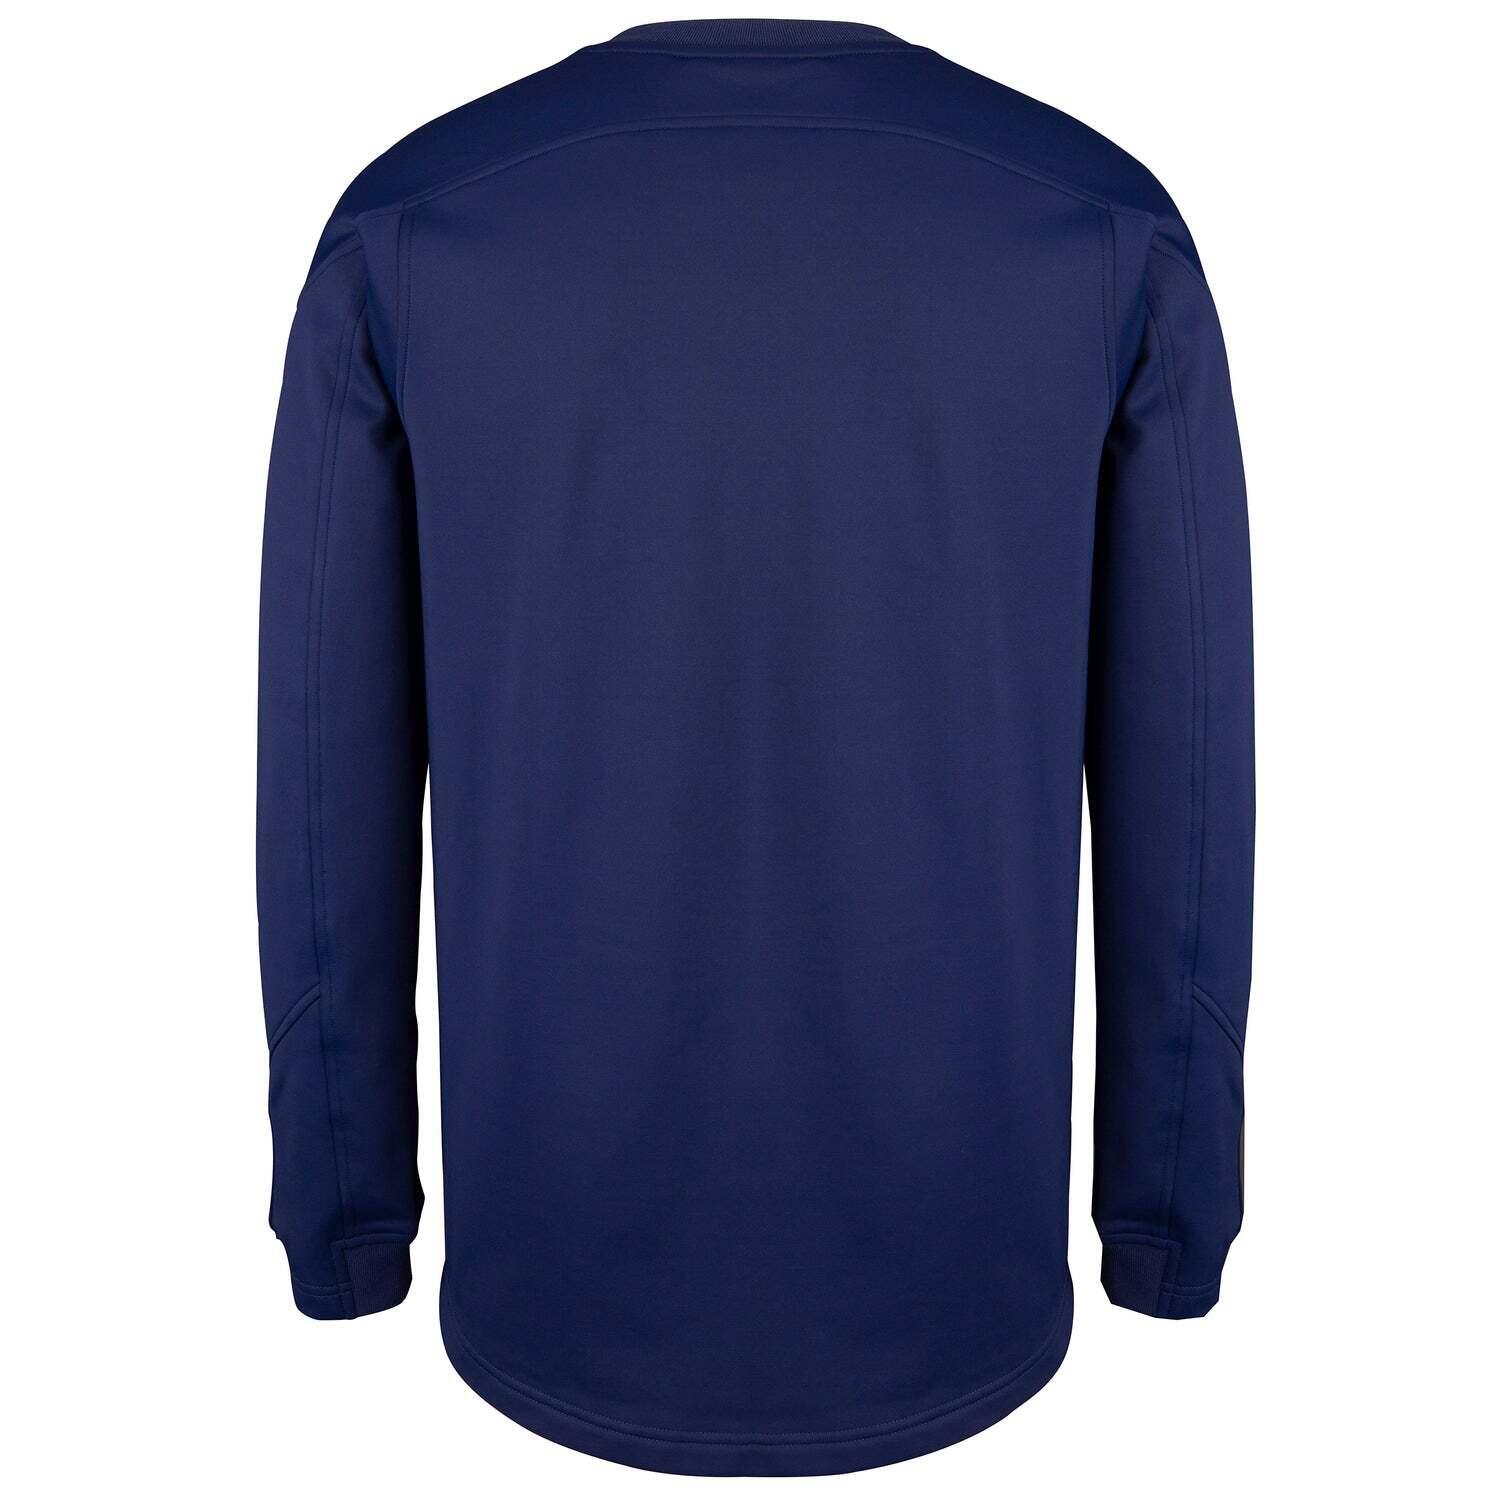 Pro Performance Adult Sweater, Navy 2/2